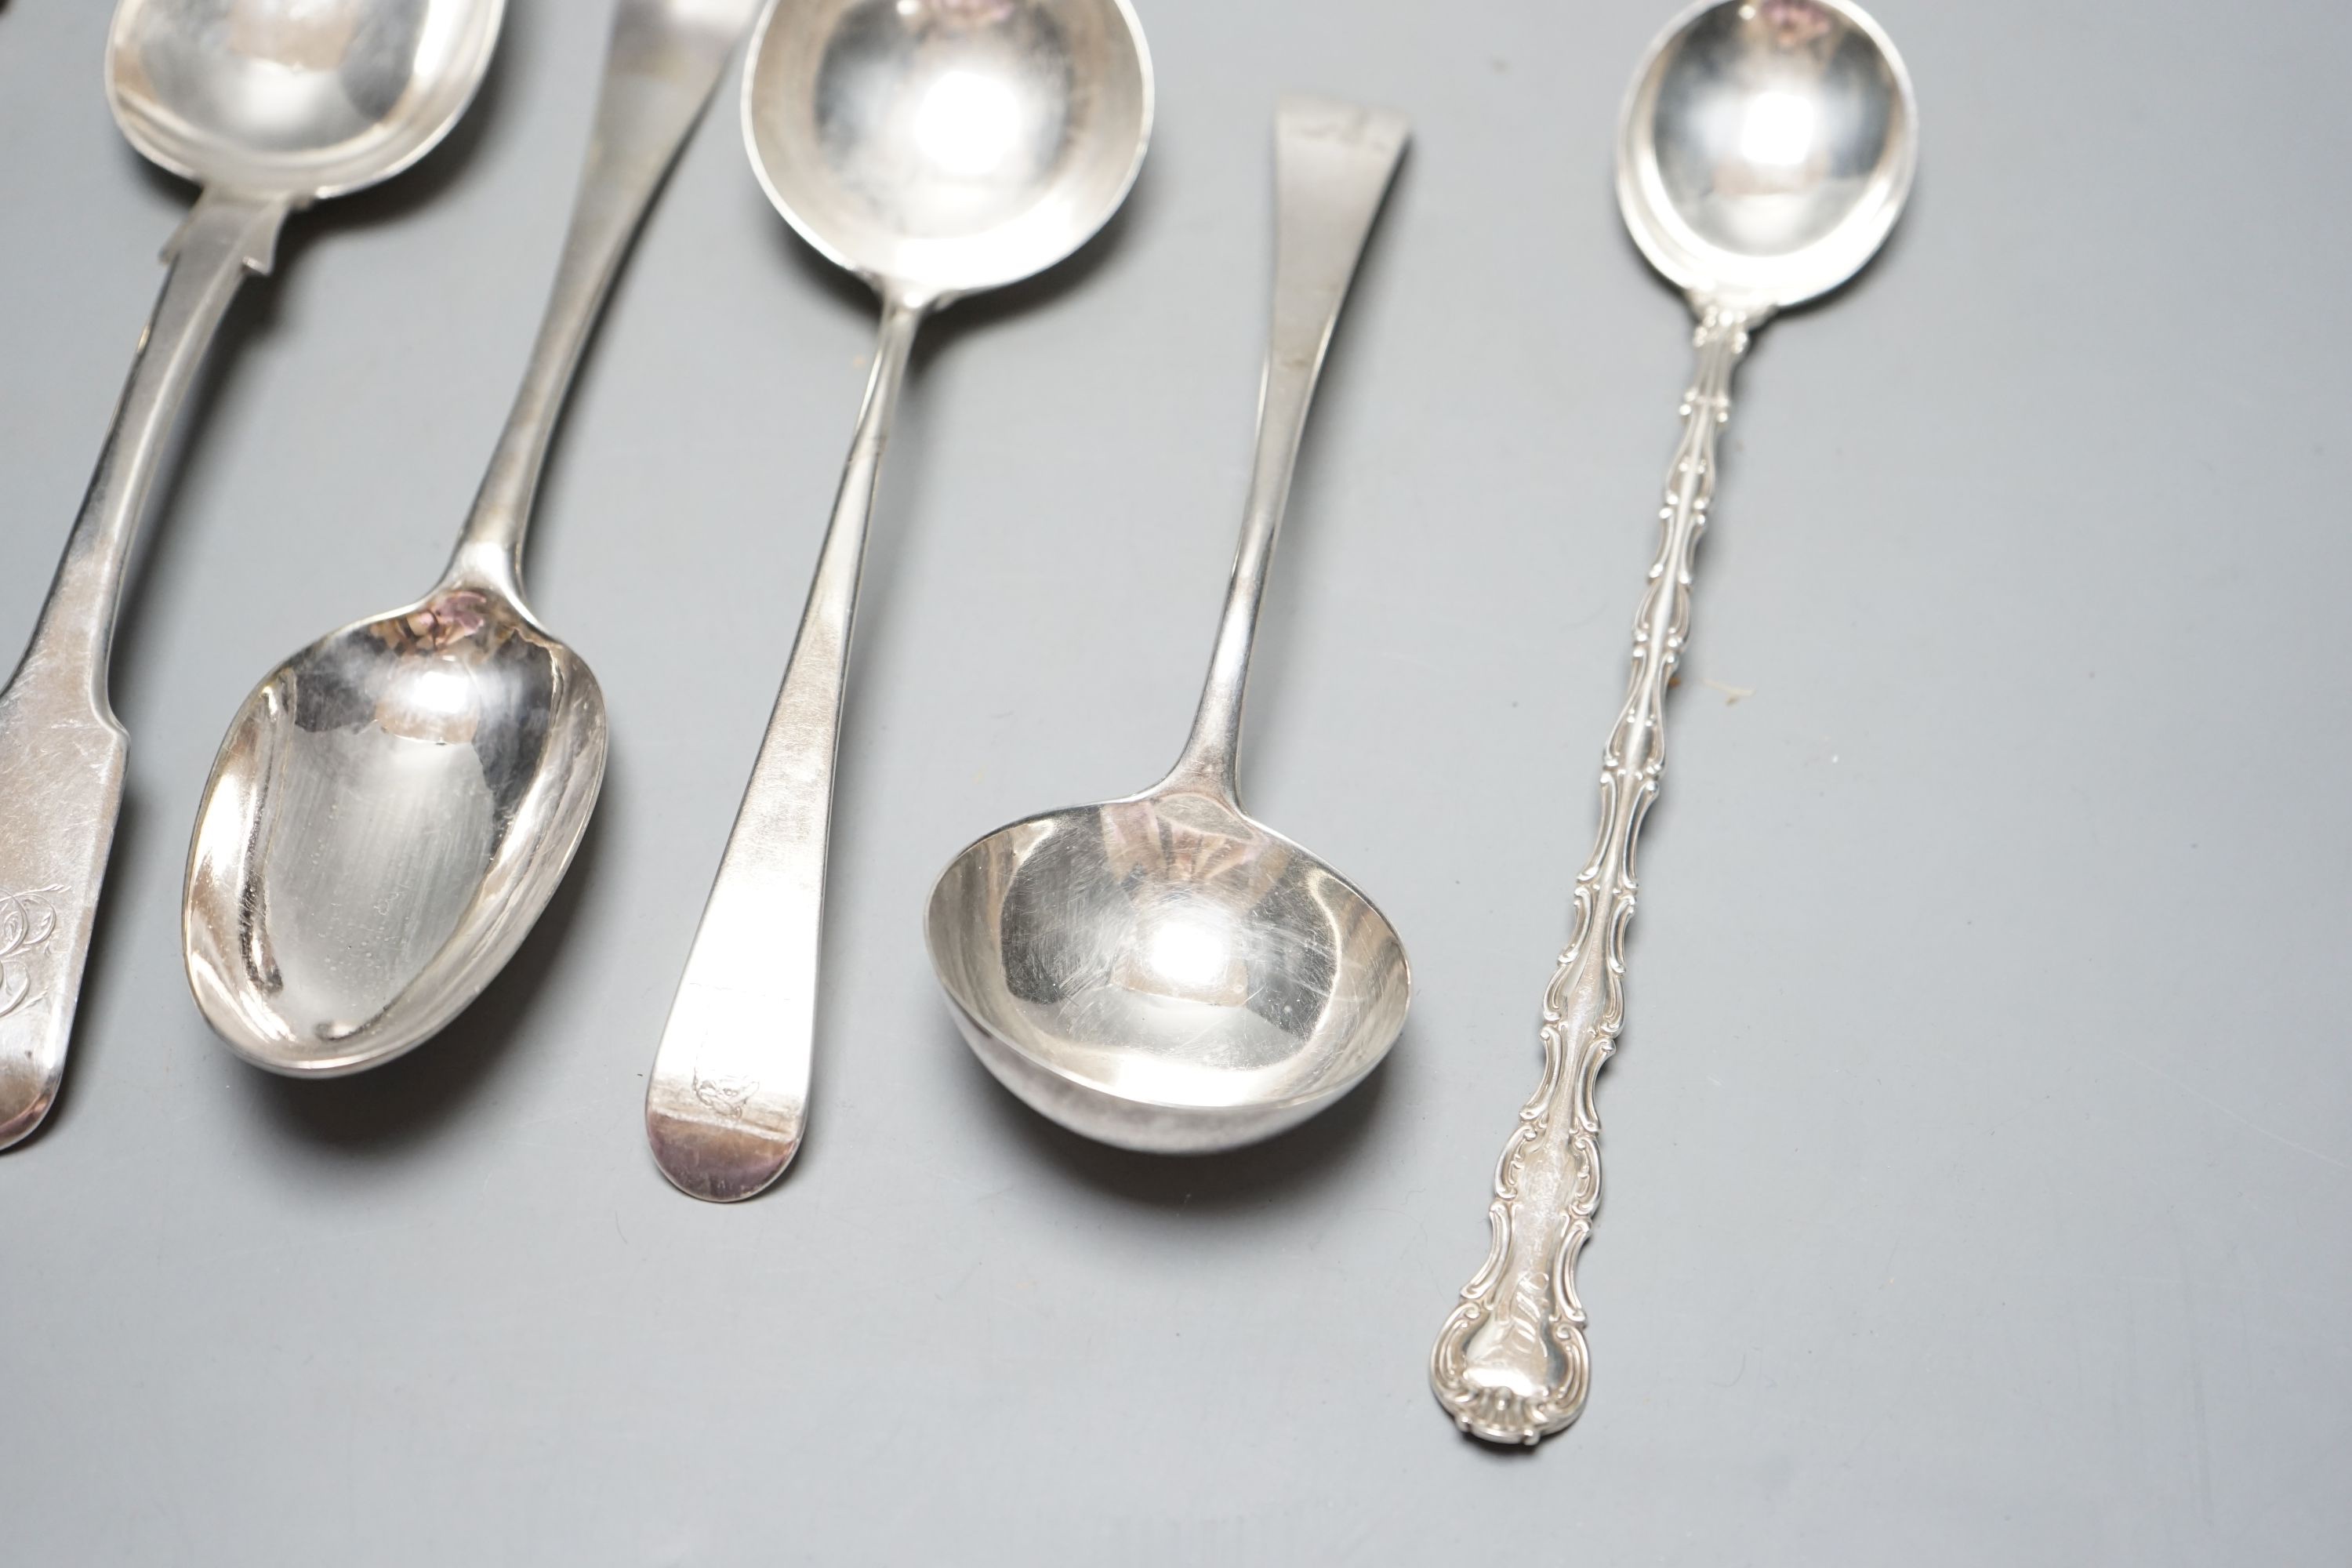 A pair of George III silver Old English pattern sauce ladles, London, 1782, 18cm, a pair of Victorian silver gilt apostle spoons, London, 1877, two Georgian silver spoons, London, 1744 & Exeter, 1818 and a sterling spoon